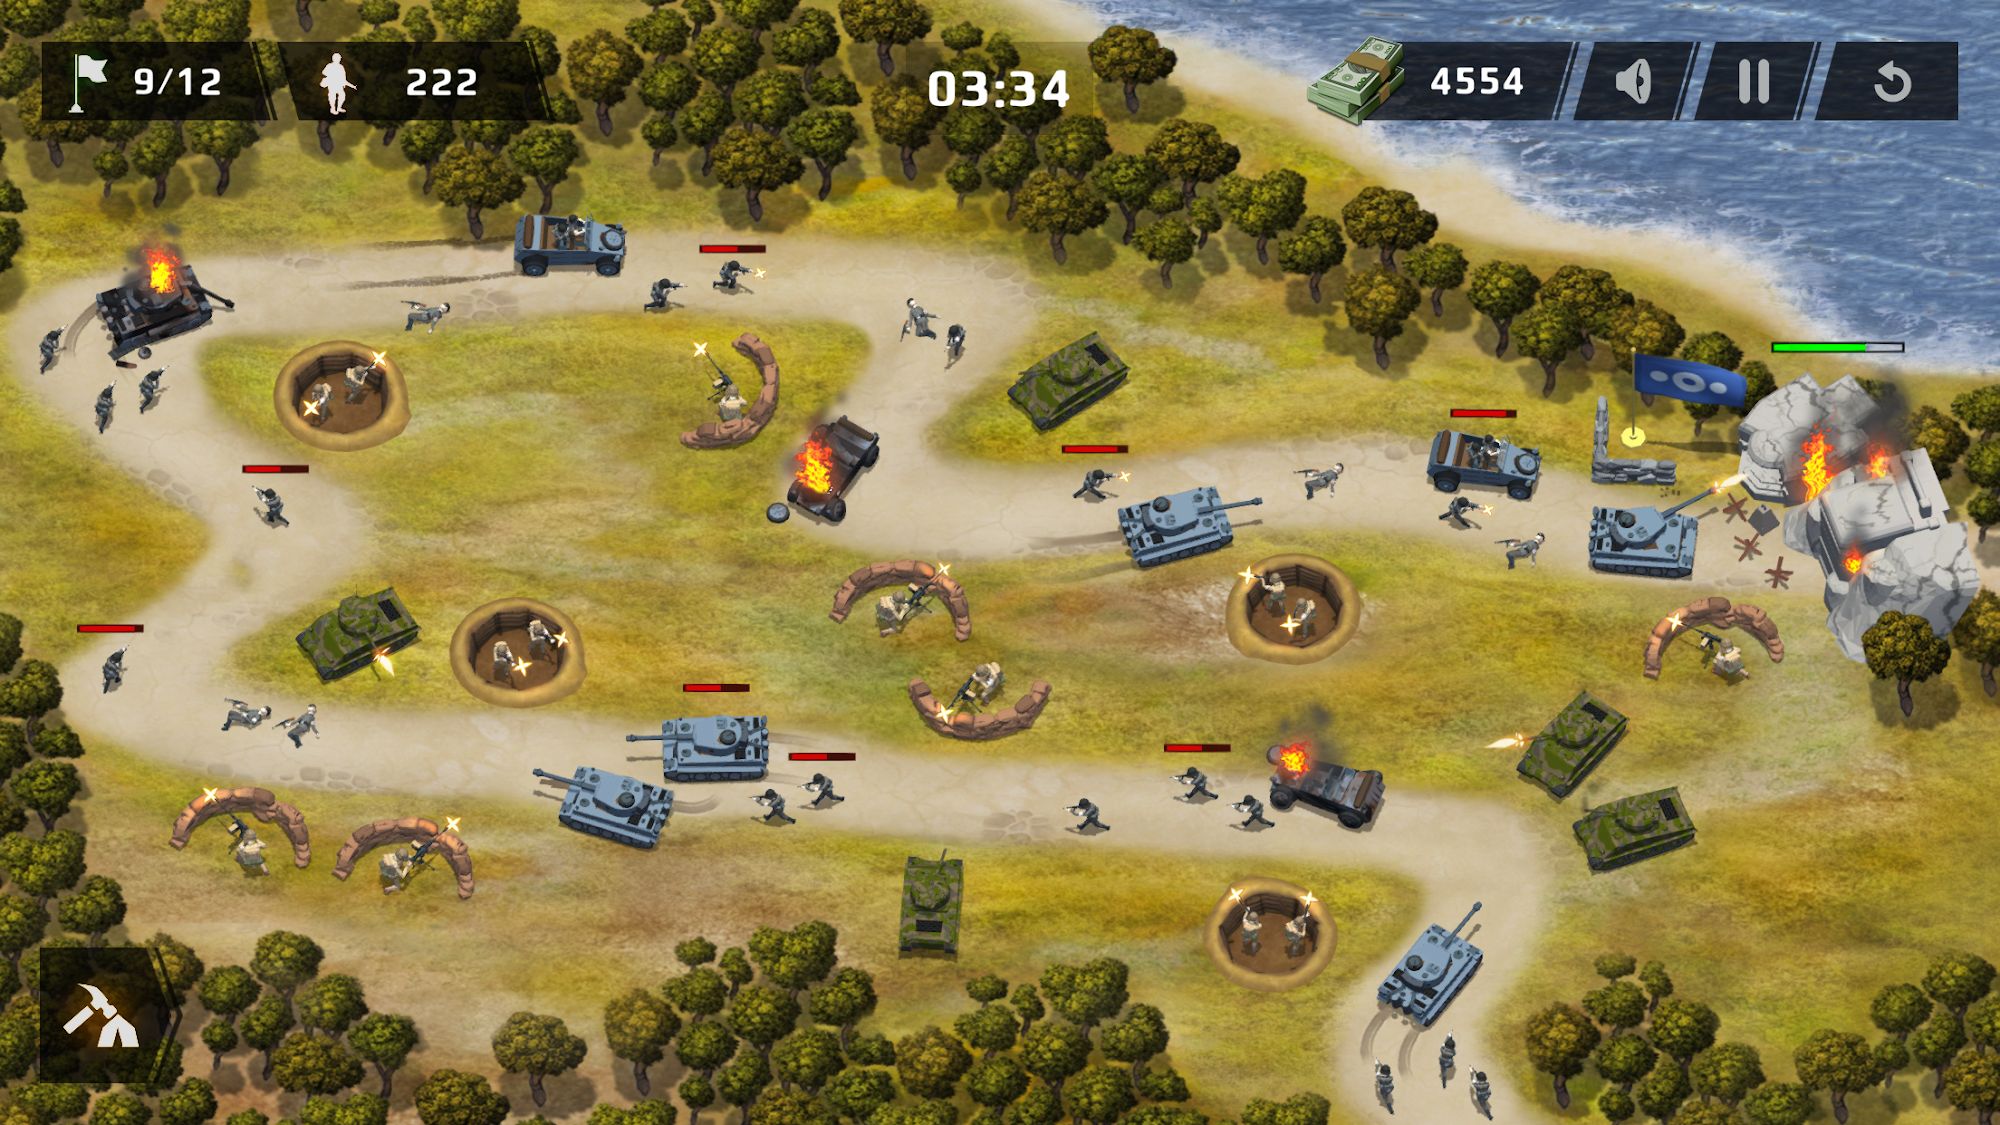 Gameplay of the WWII Defense: RTS Army TD game for Android phone or tablet.